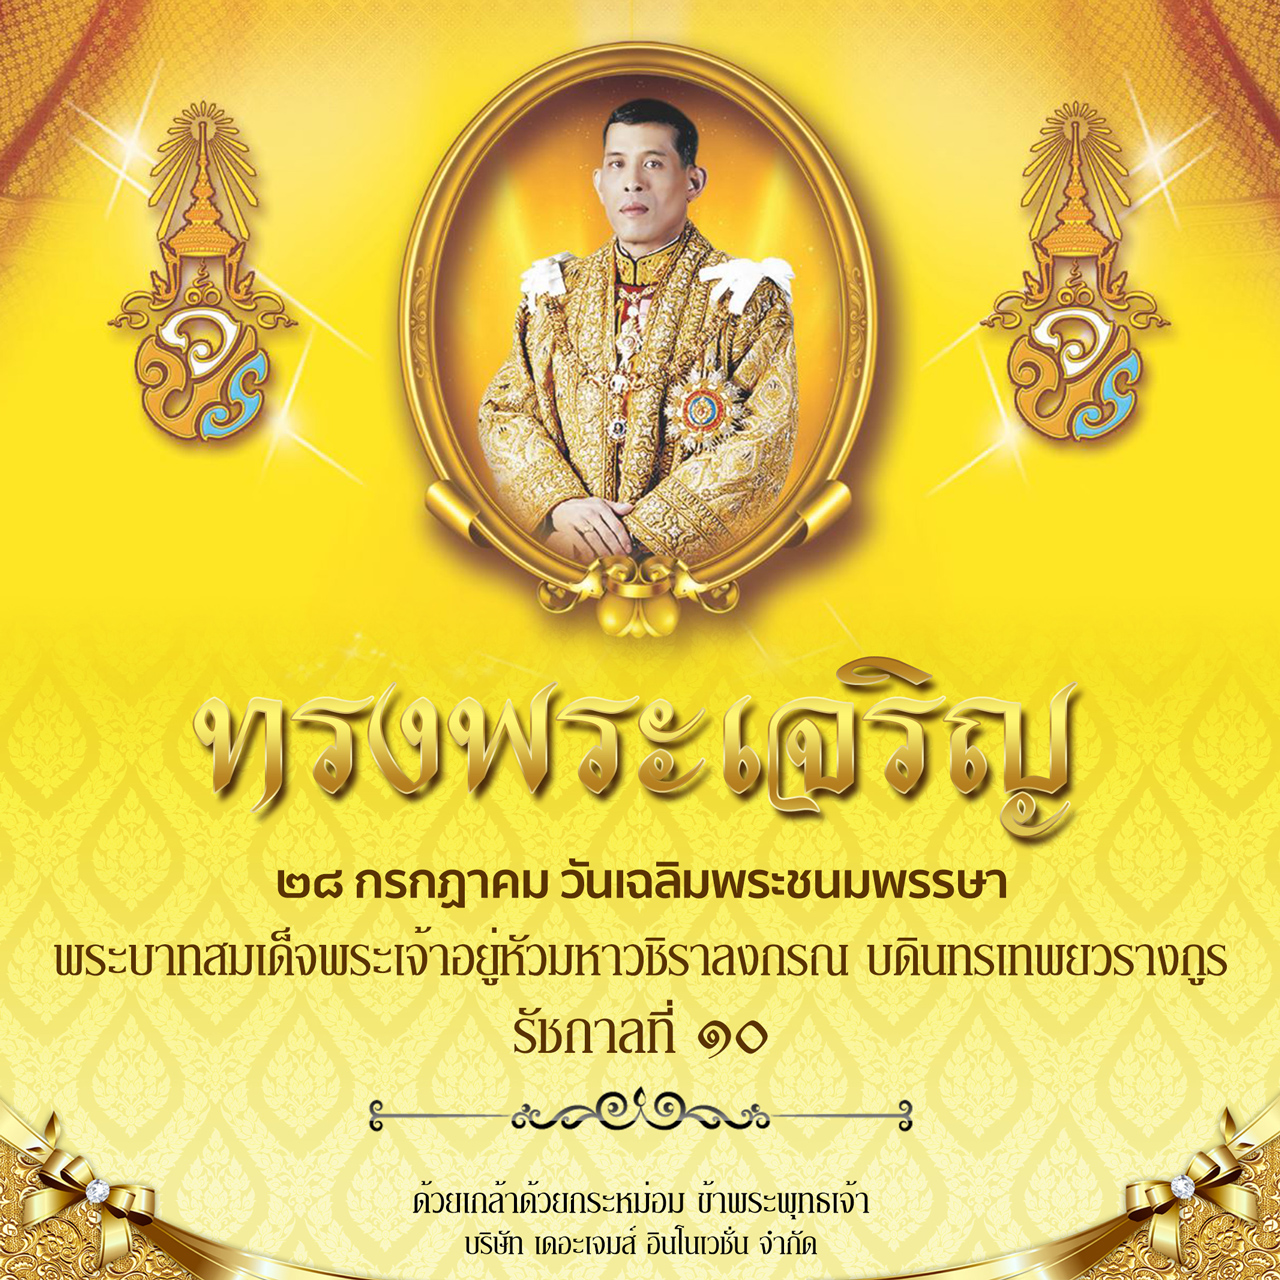 https://www.thegems.co.th/agent/images/front_news/Banner-วันรัชกาลที่10-65.jpg?_t=1658977797